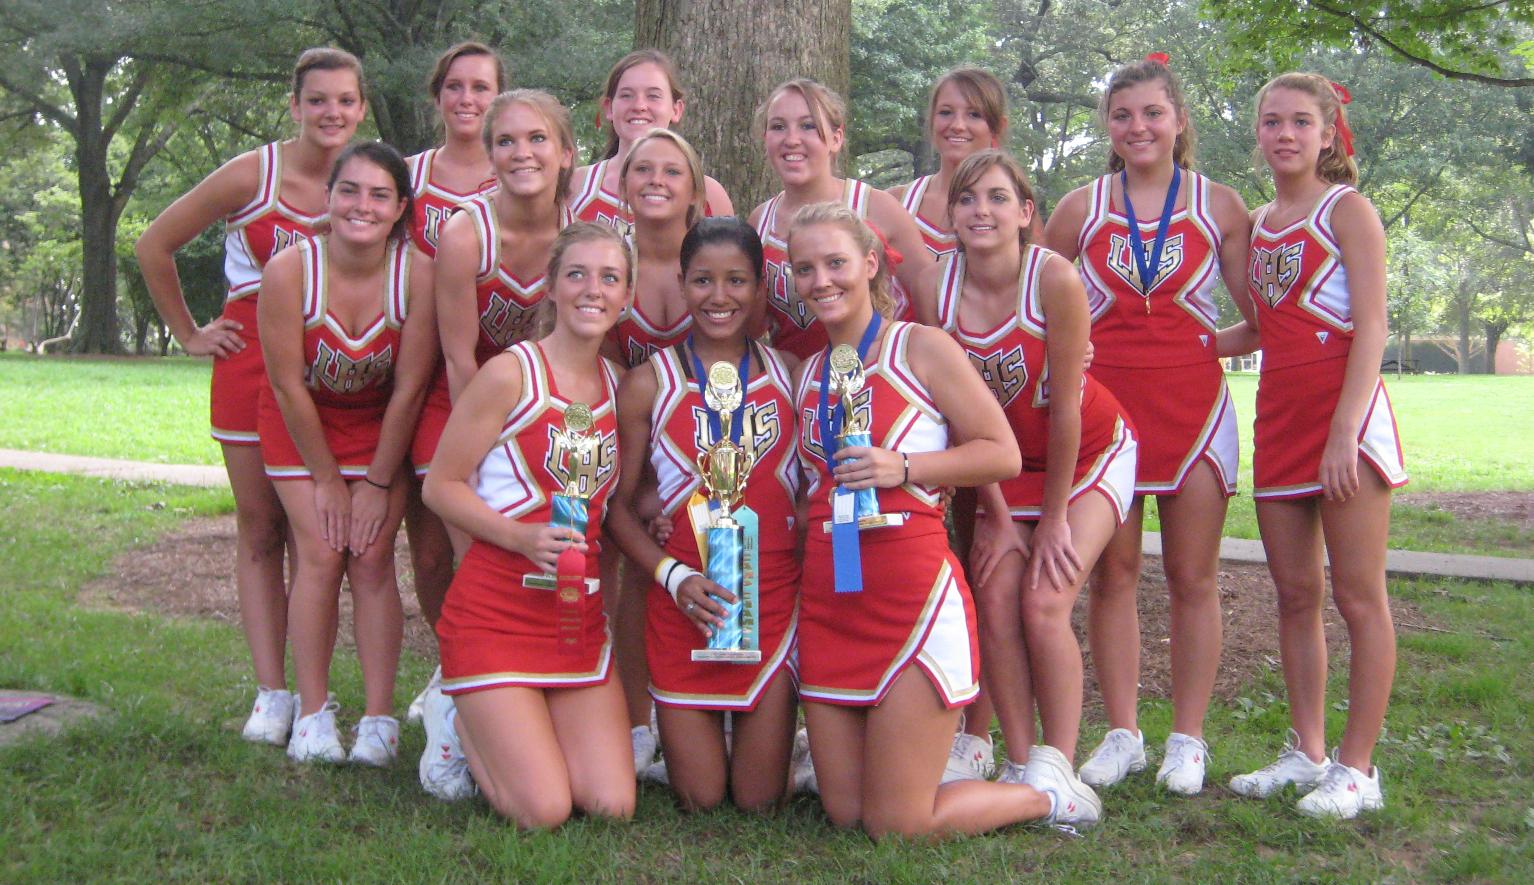 Fourteen Cheerleaders with Bare Legs wearing Short Dresses and White Sneakers